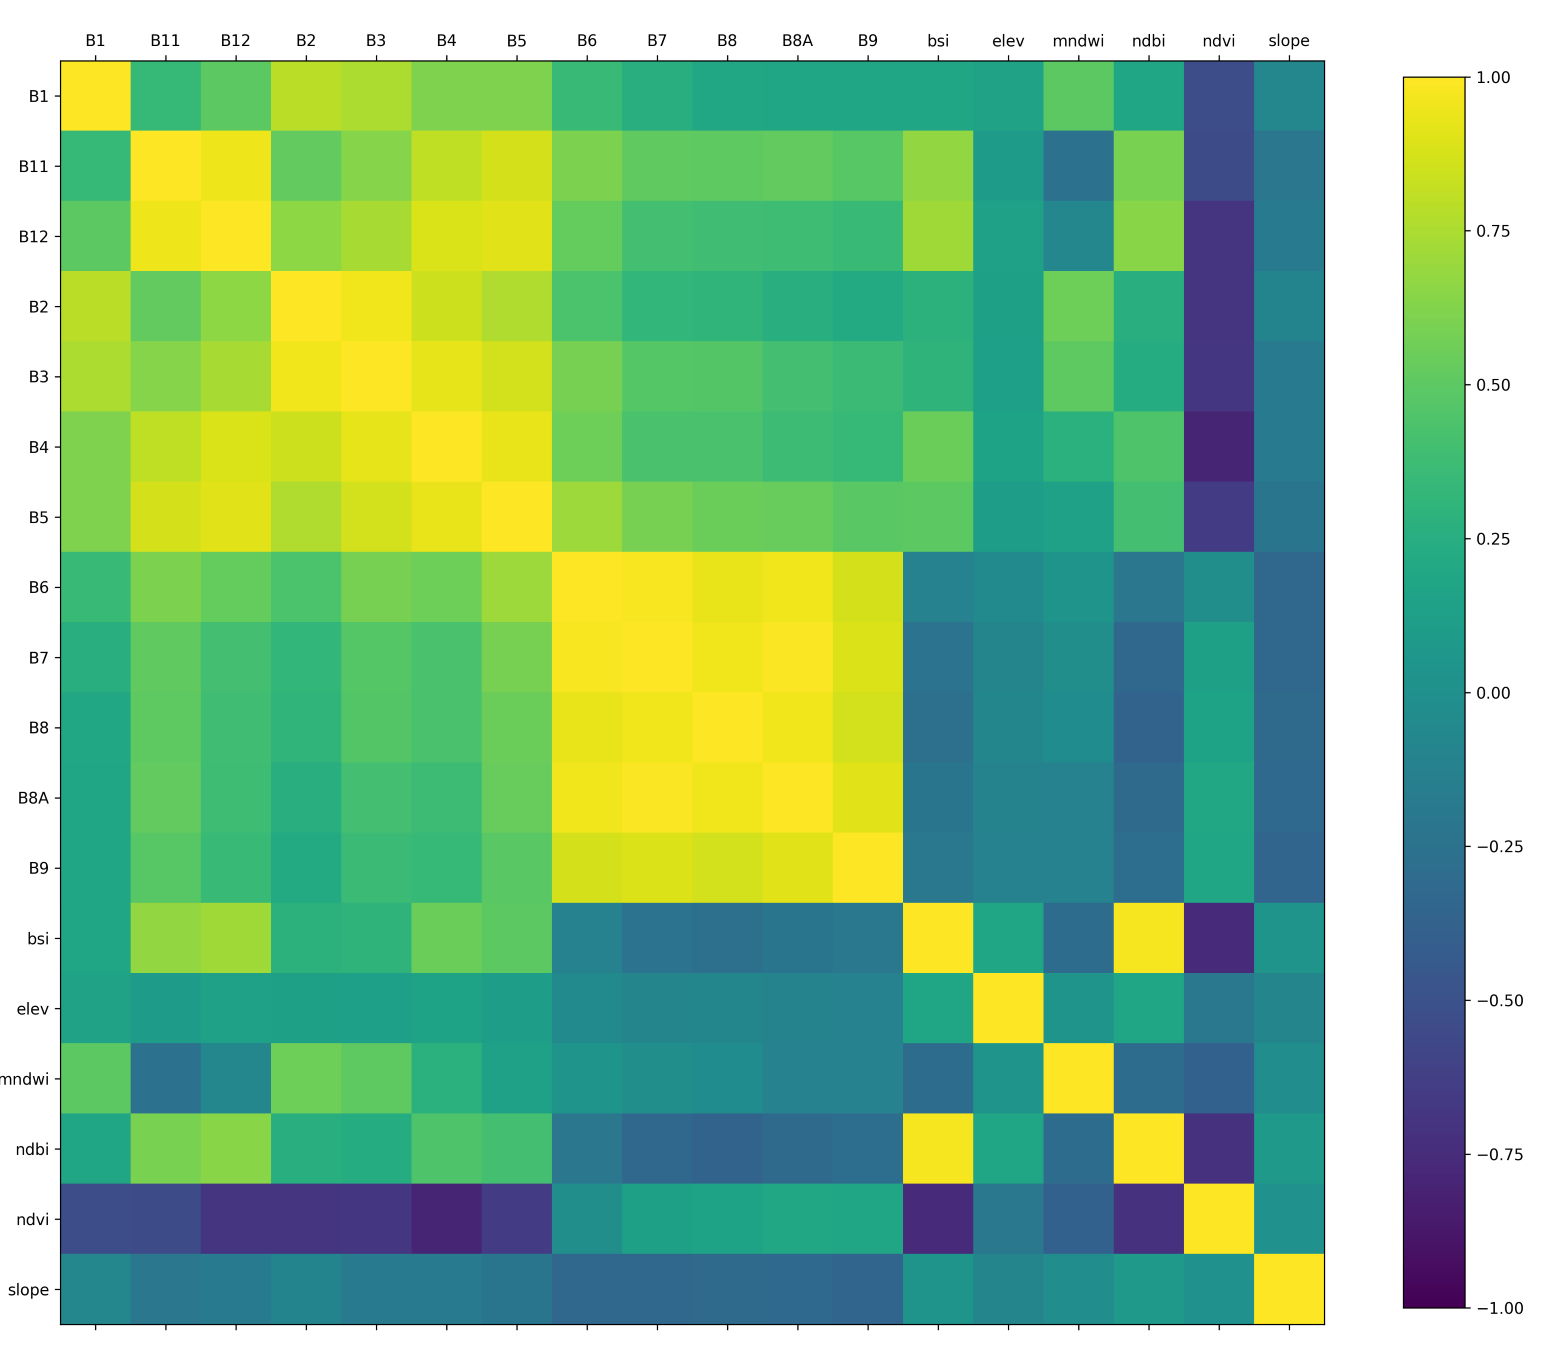 Correlation Matrix created in Python using data exported from GEE